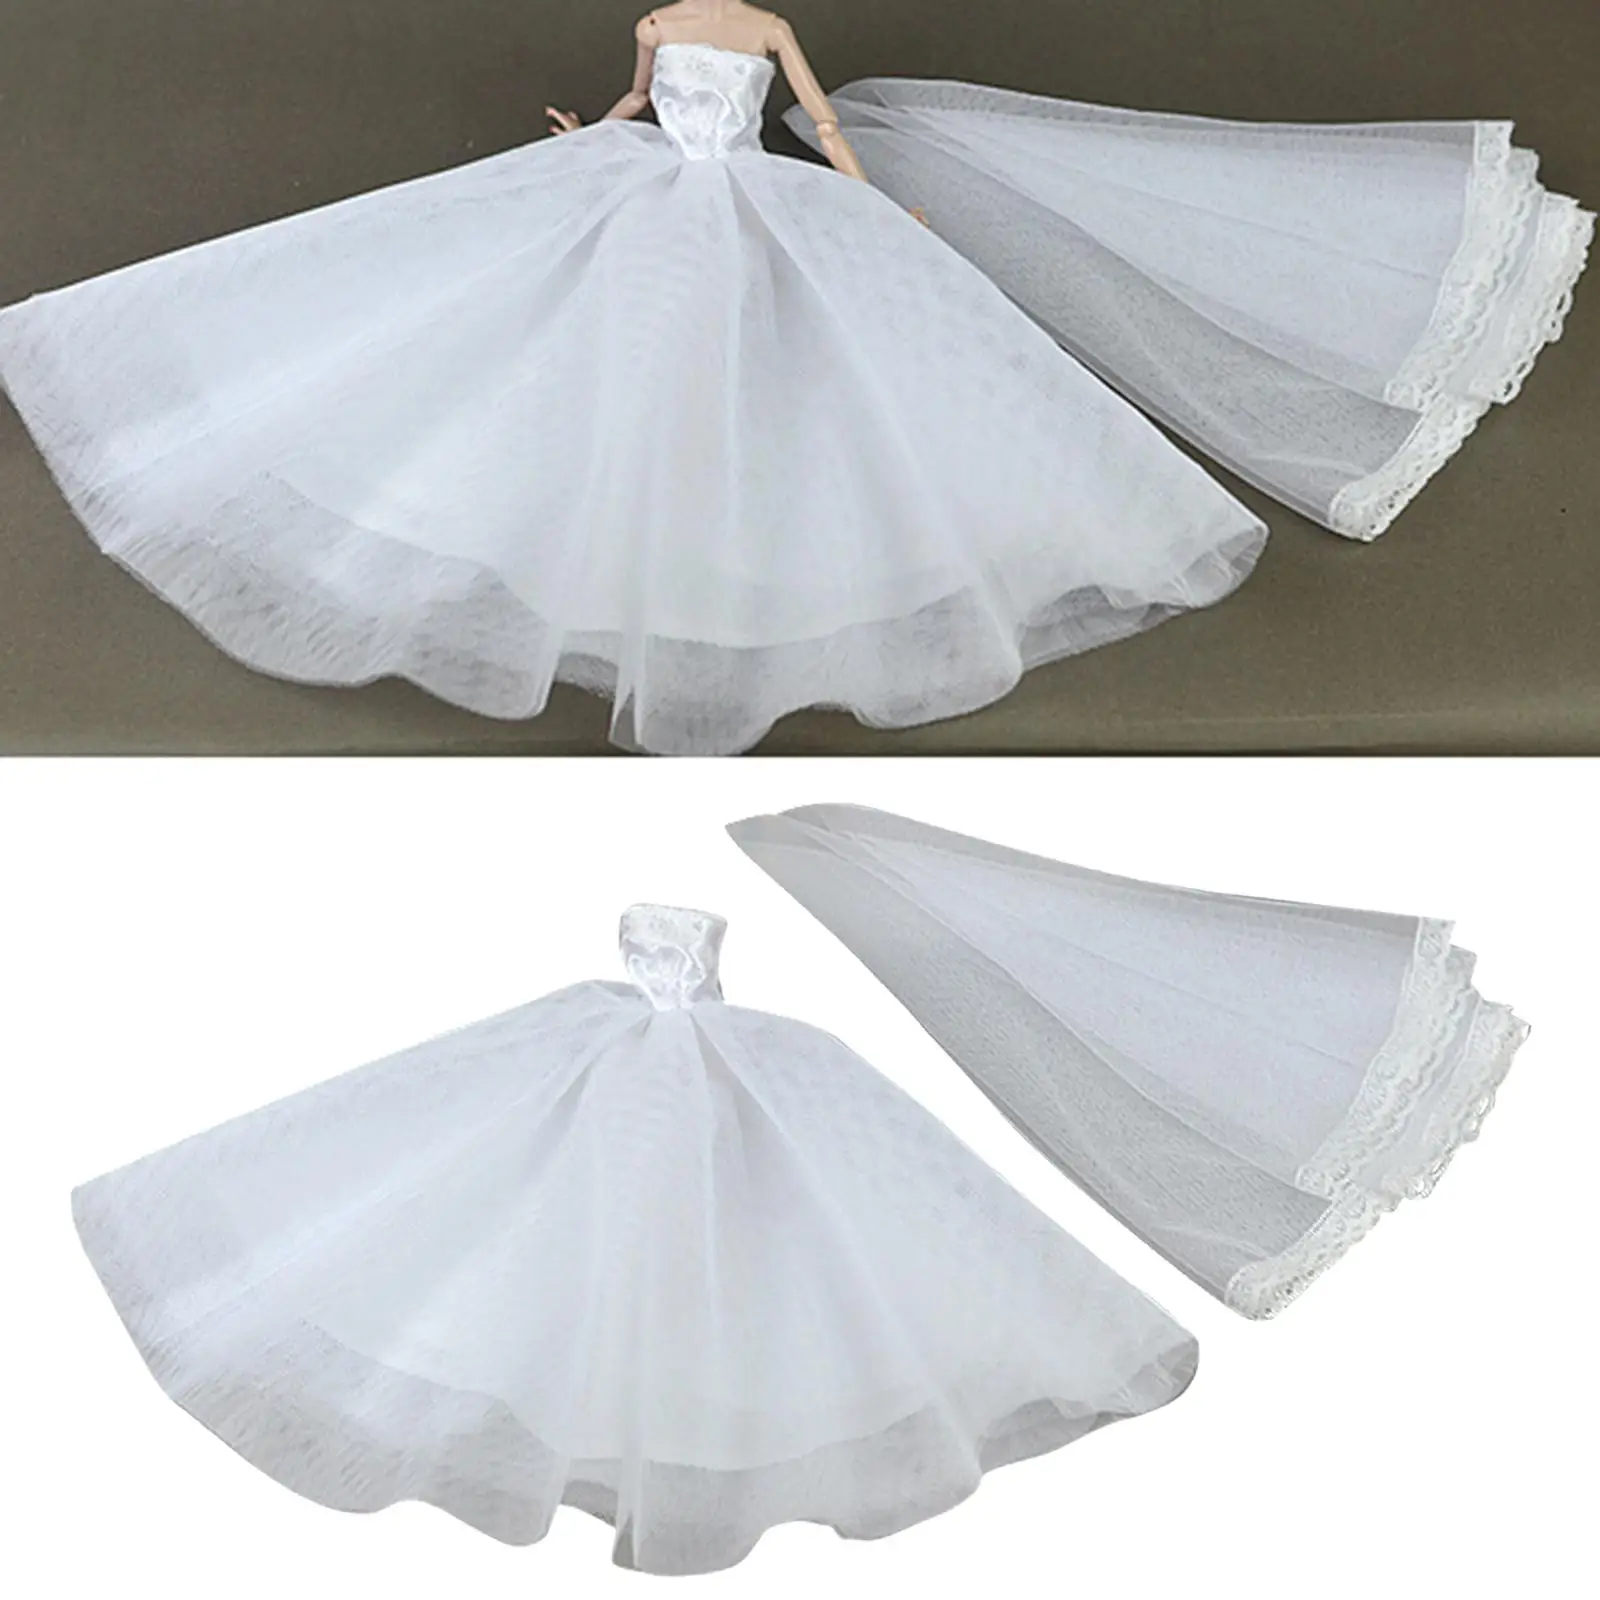 1:6 Doll Girl Wedding Dress with Long Lace Veil Dolls Gown Dress for 12inch Dolls Clothes